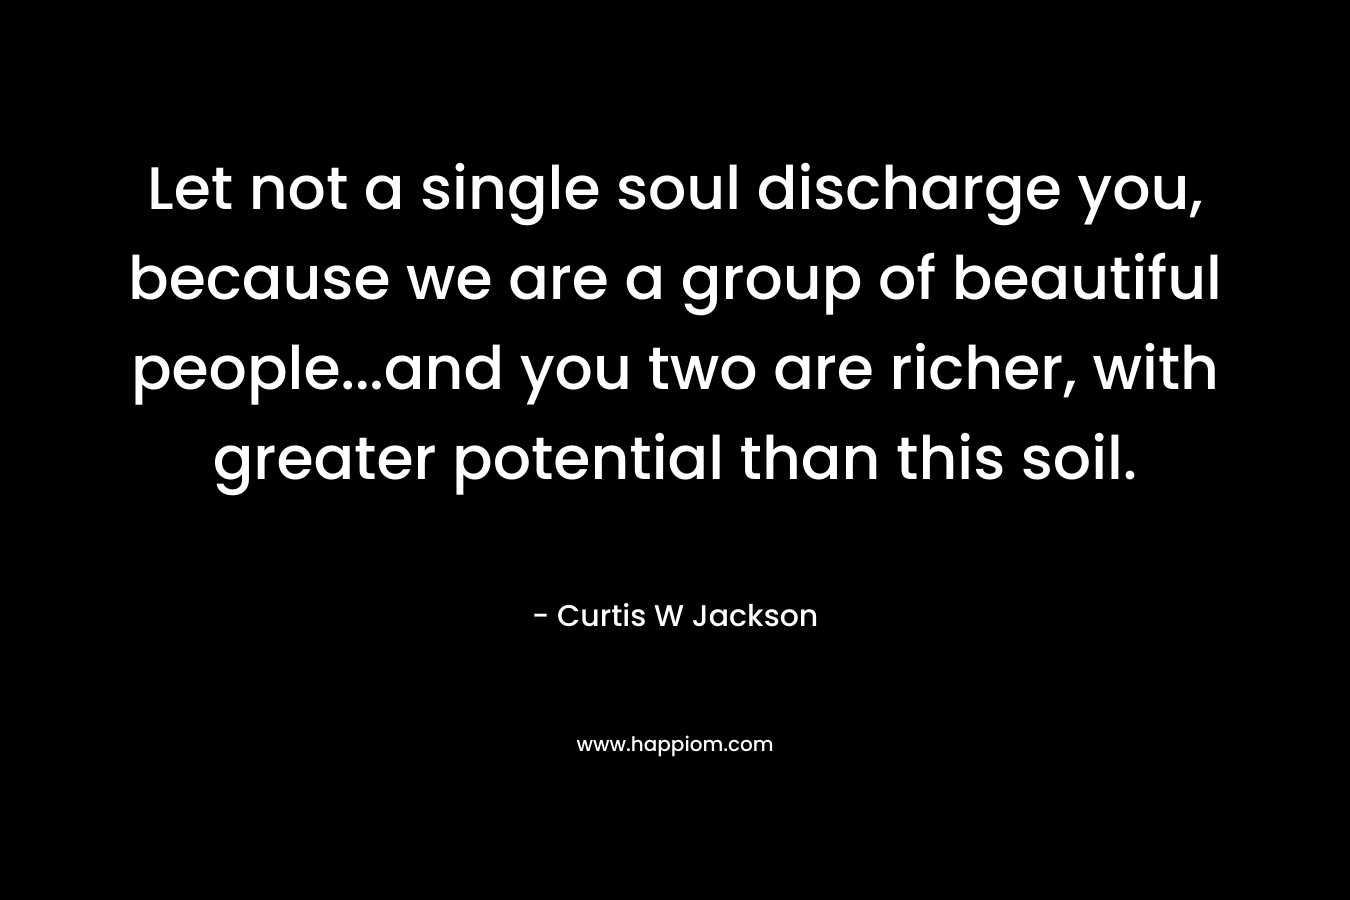 Let not a single soul discharge you, because we are a group of beautiful people...and you two are richer, with greater potential than this soil.